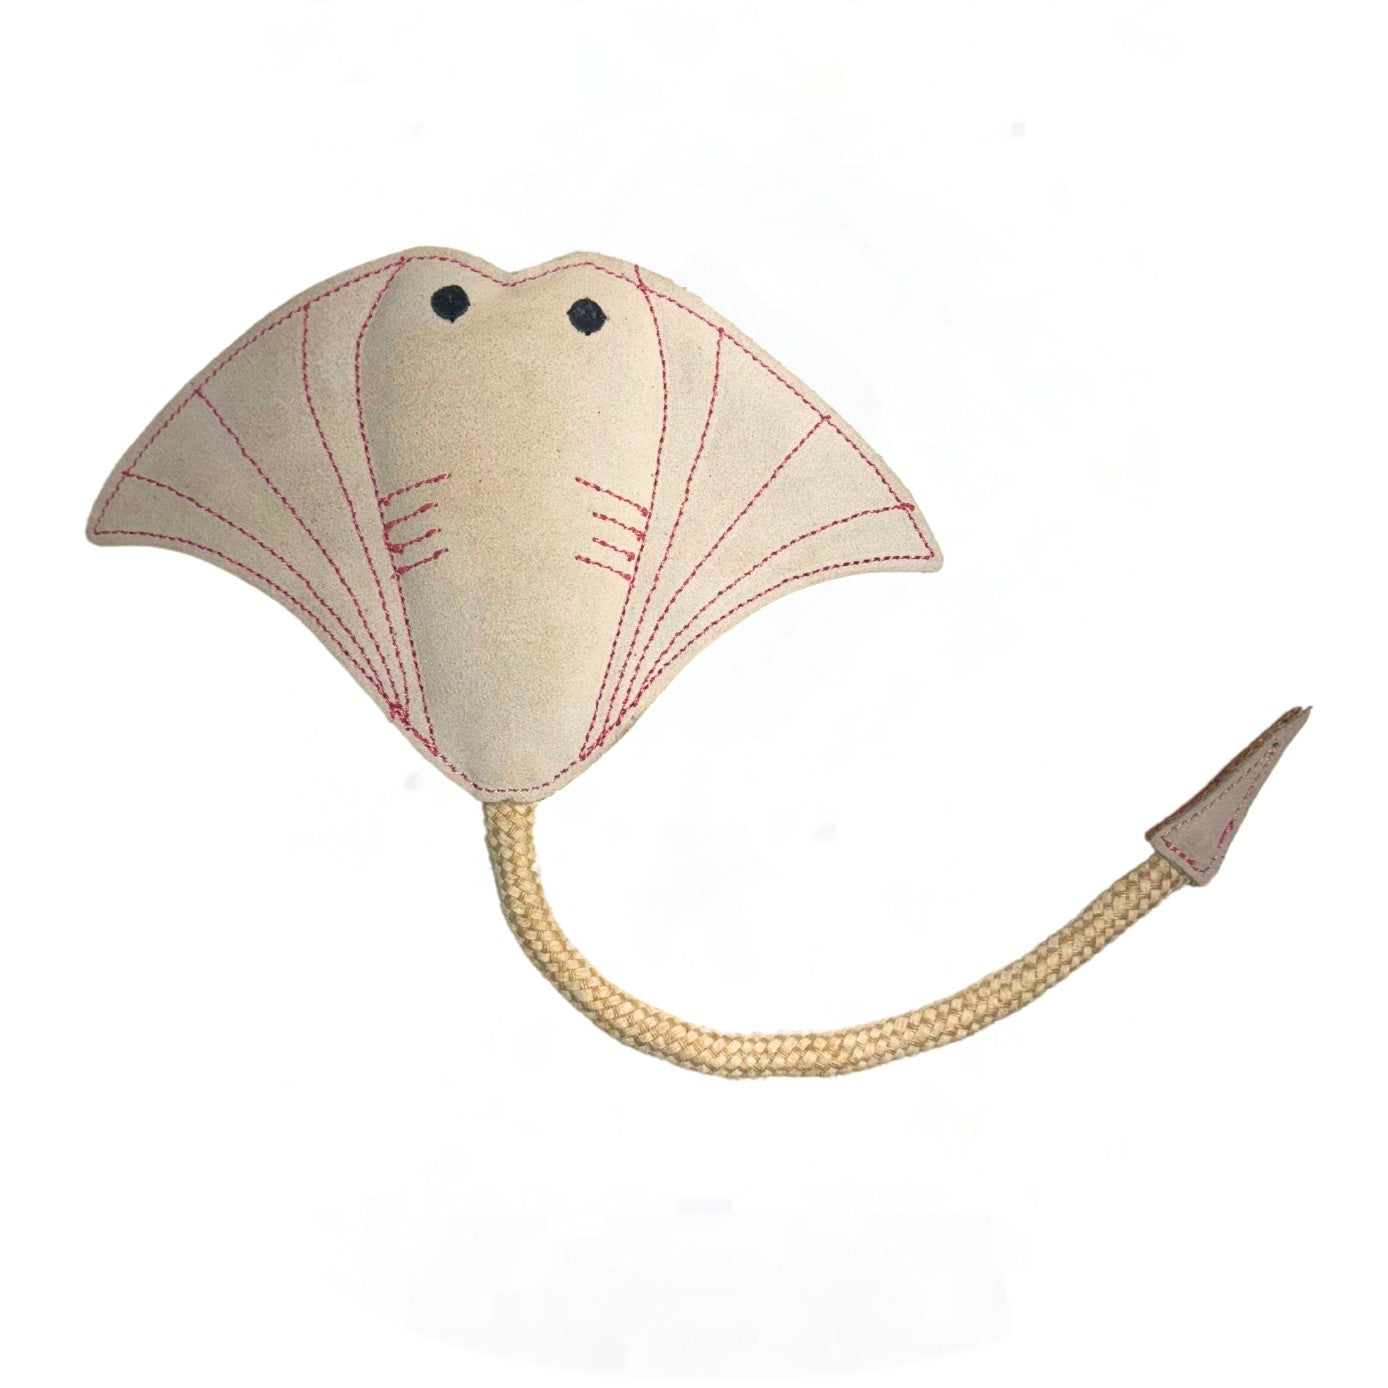 A plush Simon the Stingray - chalk toy by Georgie Paws with a beige buffalo suede body, subtle pink accents on top, and a friendly face, complete with a long, rope-like tail ending in a pointed tip.